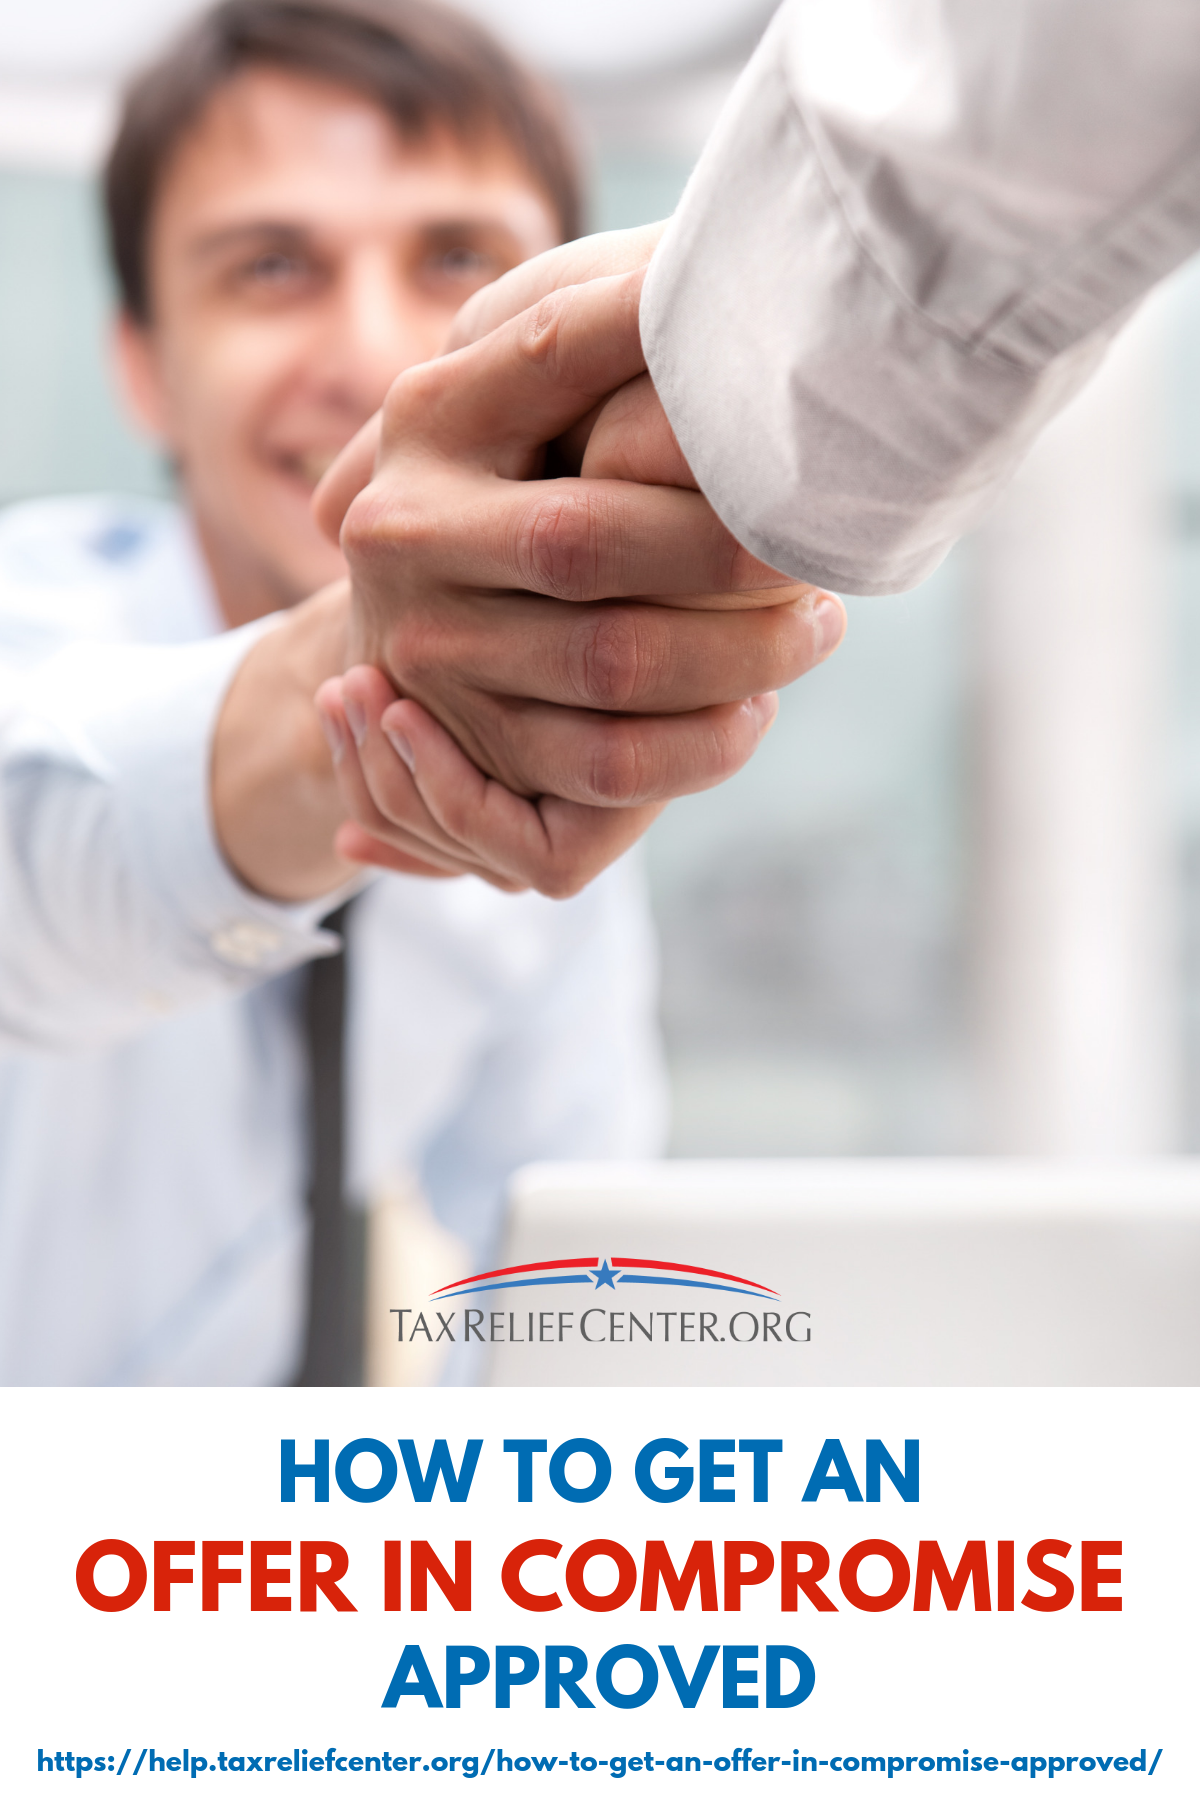 How To Get An Offer In Compromise Approved | 11 Tips https://help.taxreliefcenter.org/how-to-get-an-offer-in-compromise-approved/